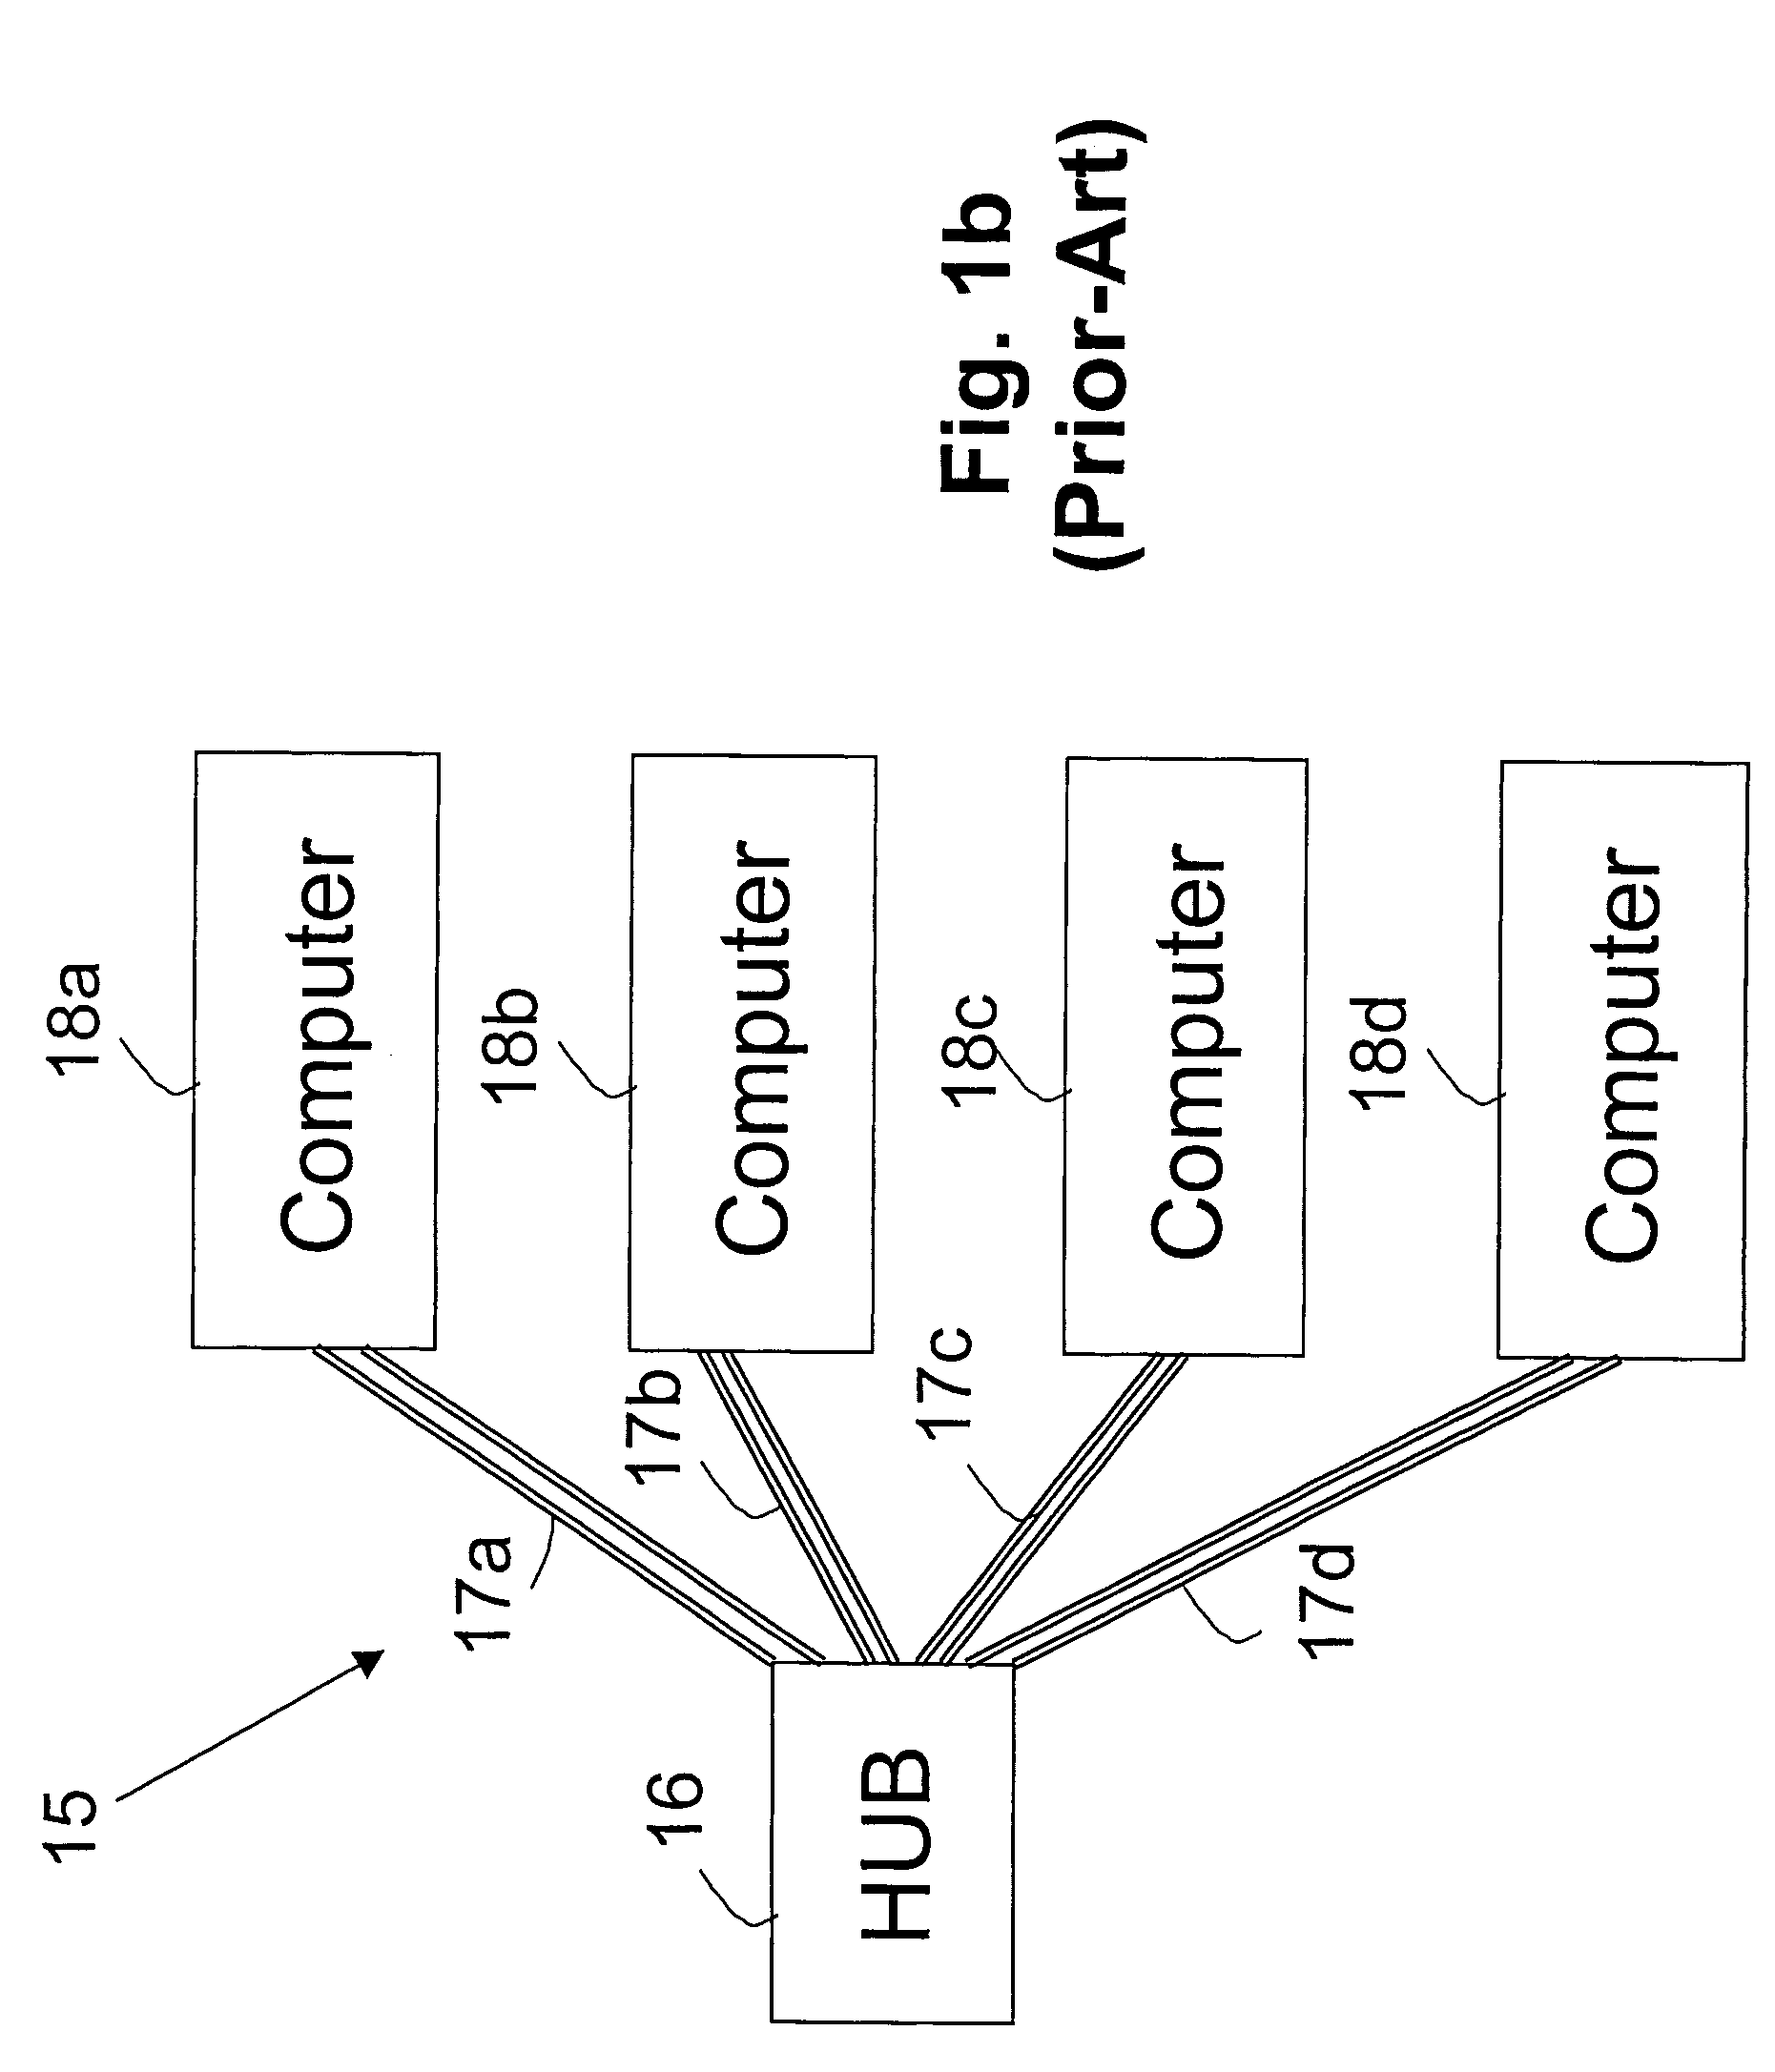 Telephone communication system and method over local area network wiring